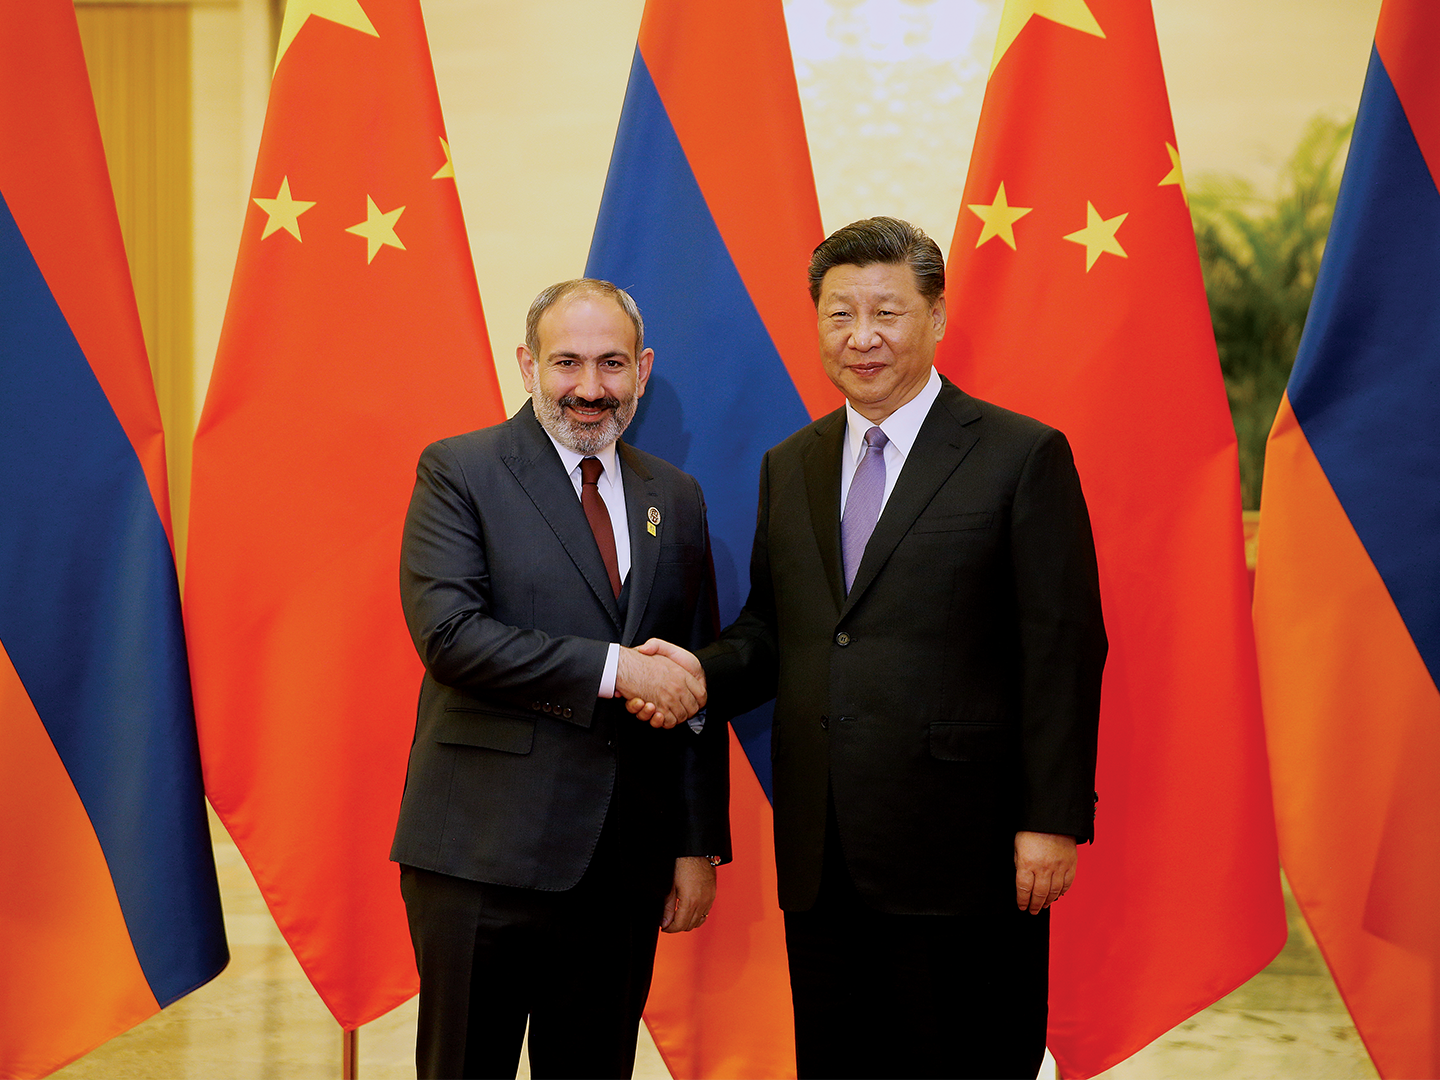 Prime Minister of Armenia Nikol Pashinyan with President of the People’s Republic of China Xi Jinping.